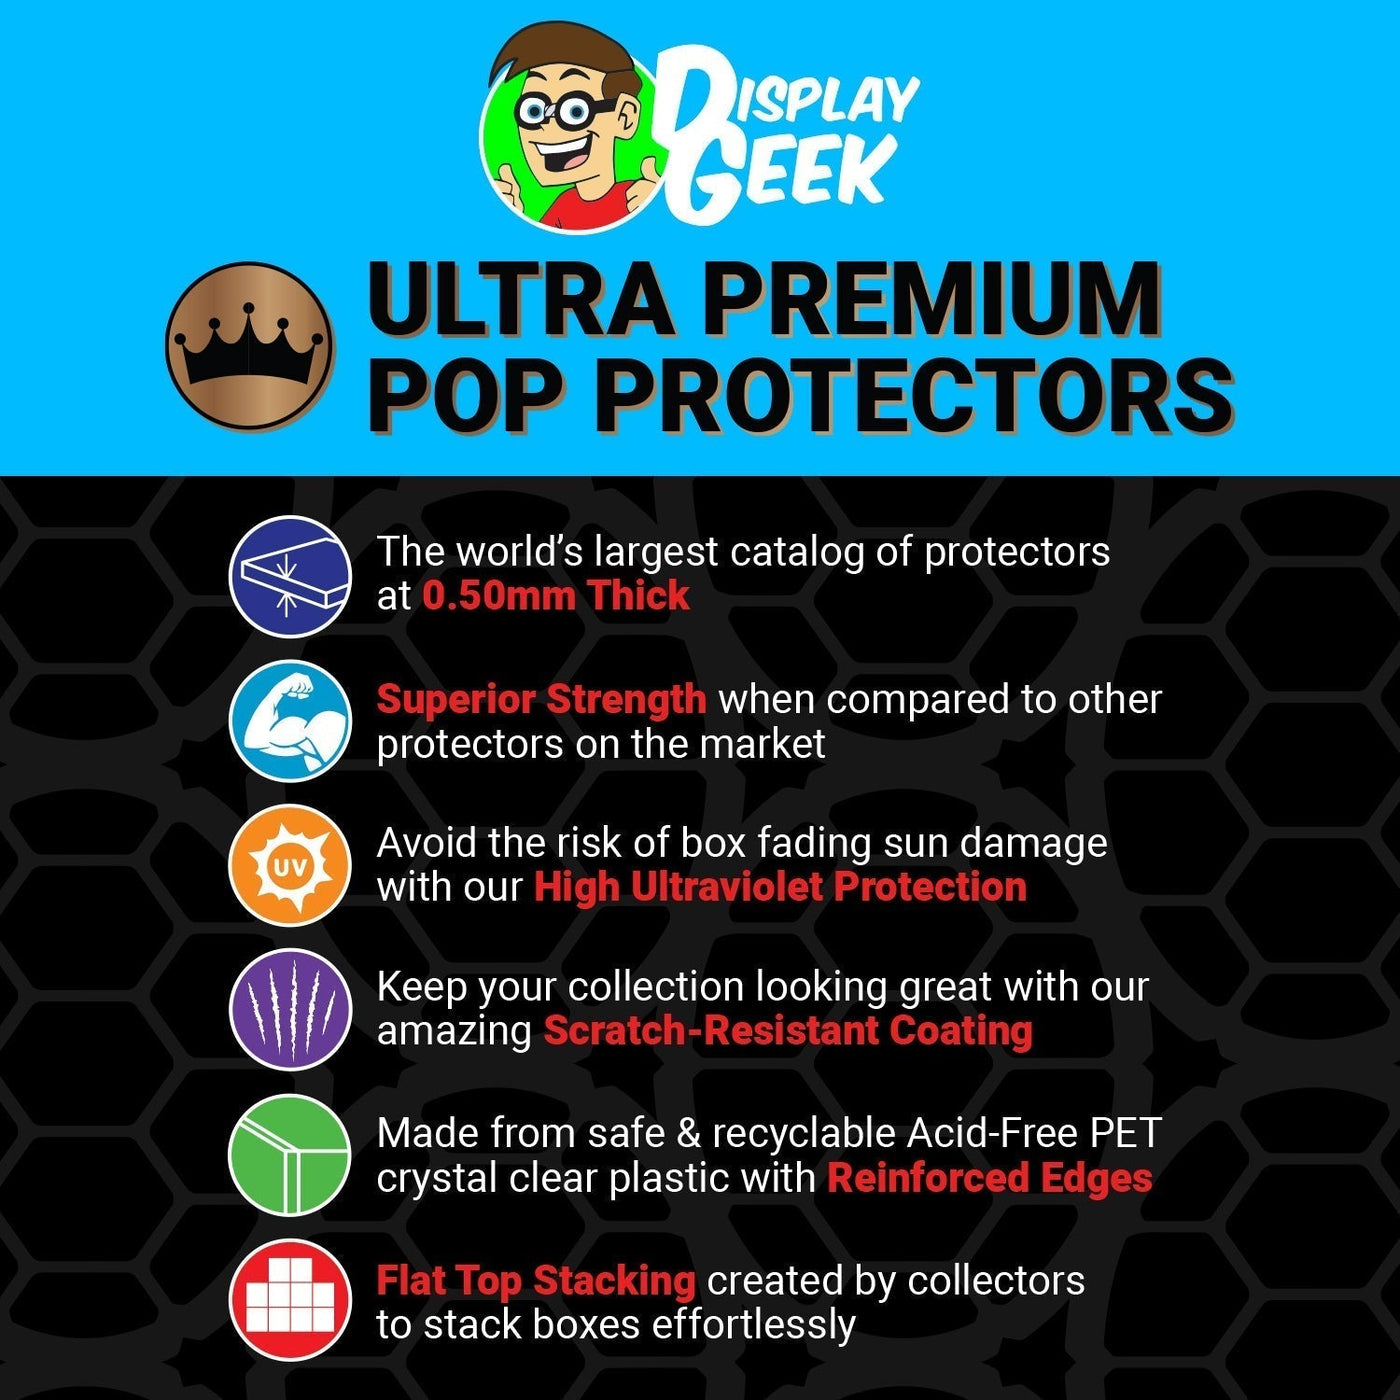 Pop Protector for 6 inch Porunga ECCC #553 Super Funko Pop on The Protector Guide App by Display Geek